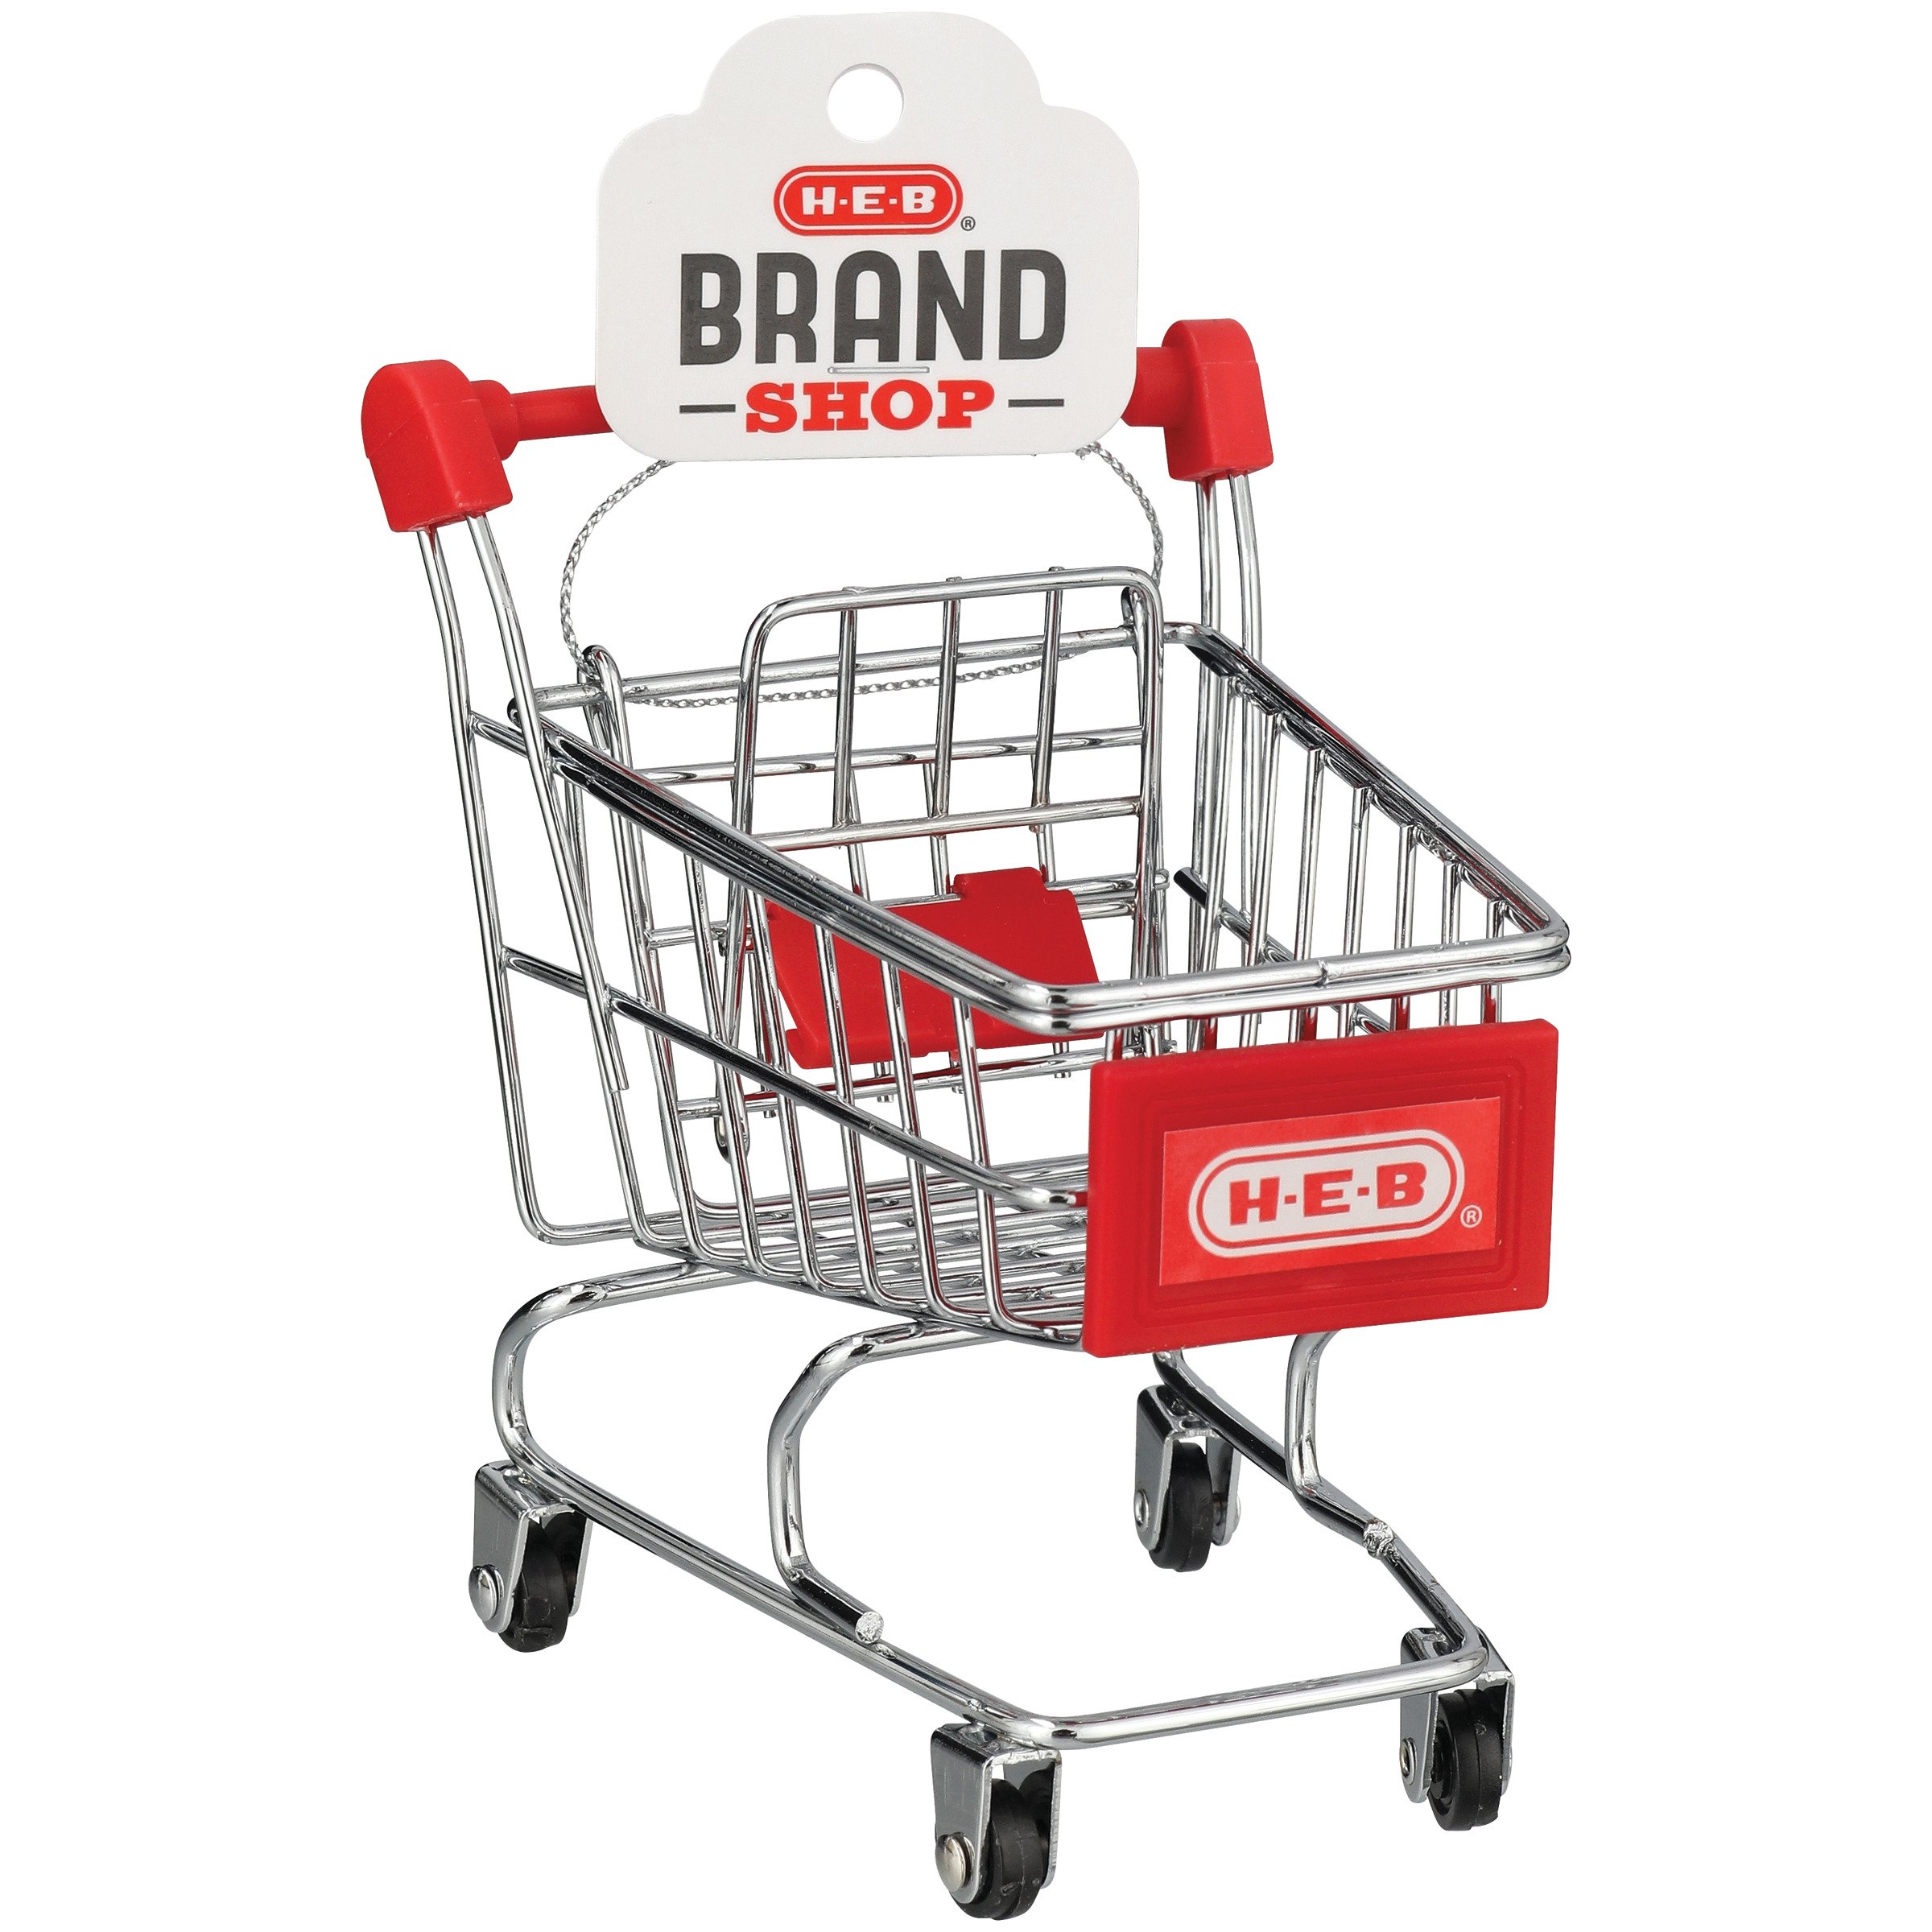 https://images.heb.com/is/image/HEBGrocery/009373518-1